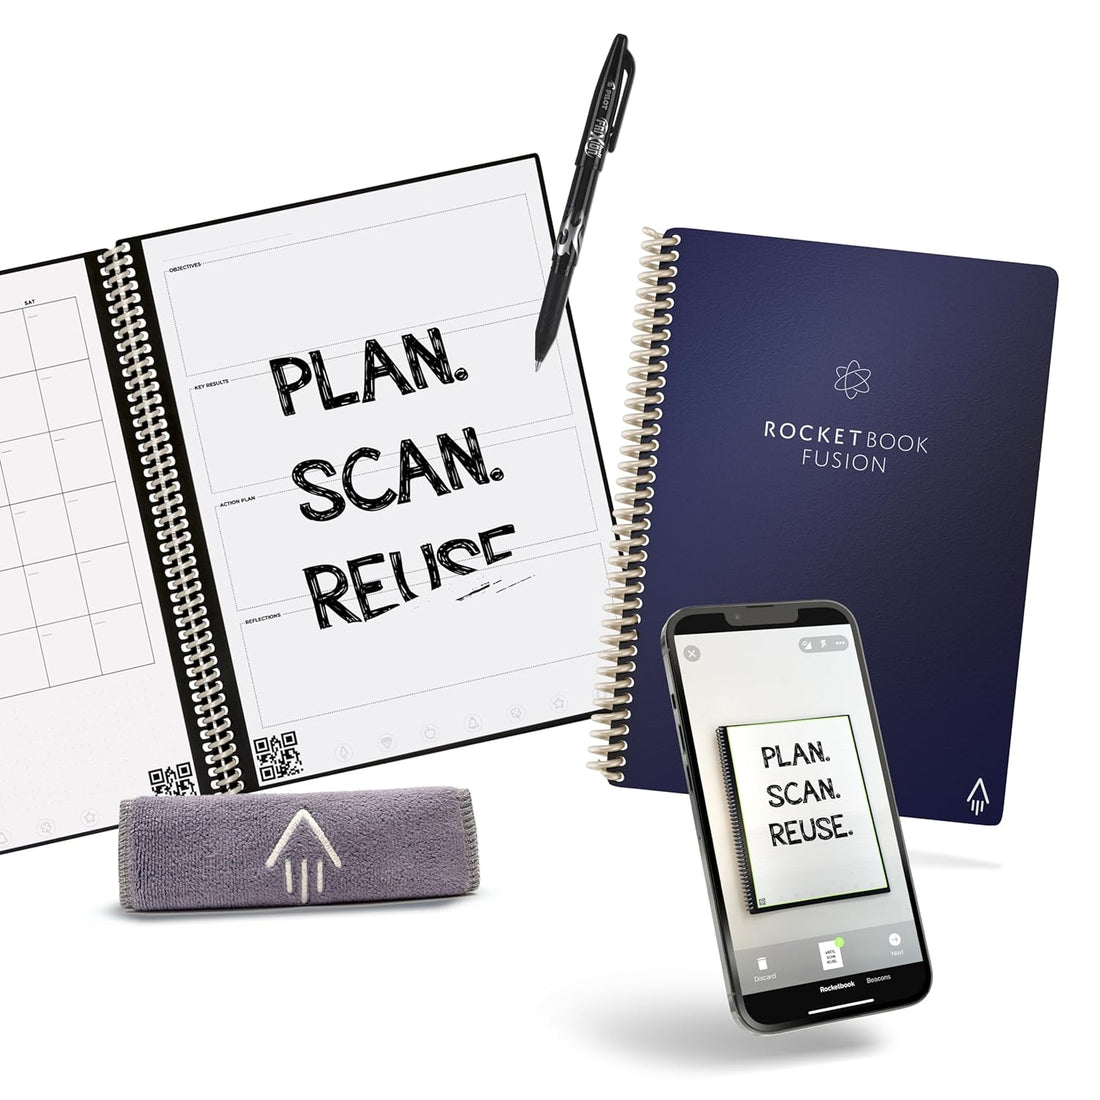 Rocketbook Fusion Smart Reusable Notebook - Calendar, To-Do Lists, and Note Template Pages with 1 Pilot Frixion Pen & 1 Microfiber Cloth Included - Midnight Blue Cover, Executive Size (6" x 8.8")